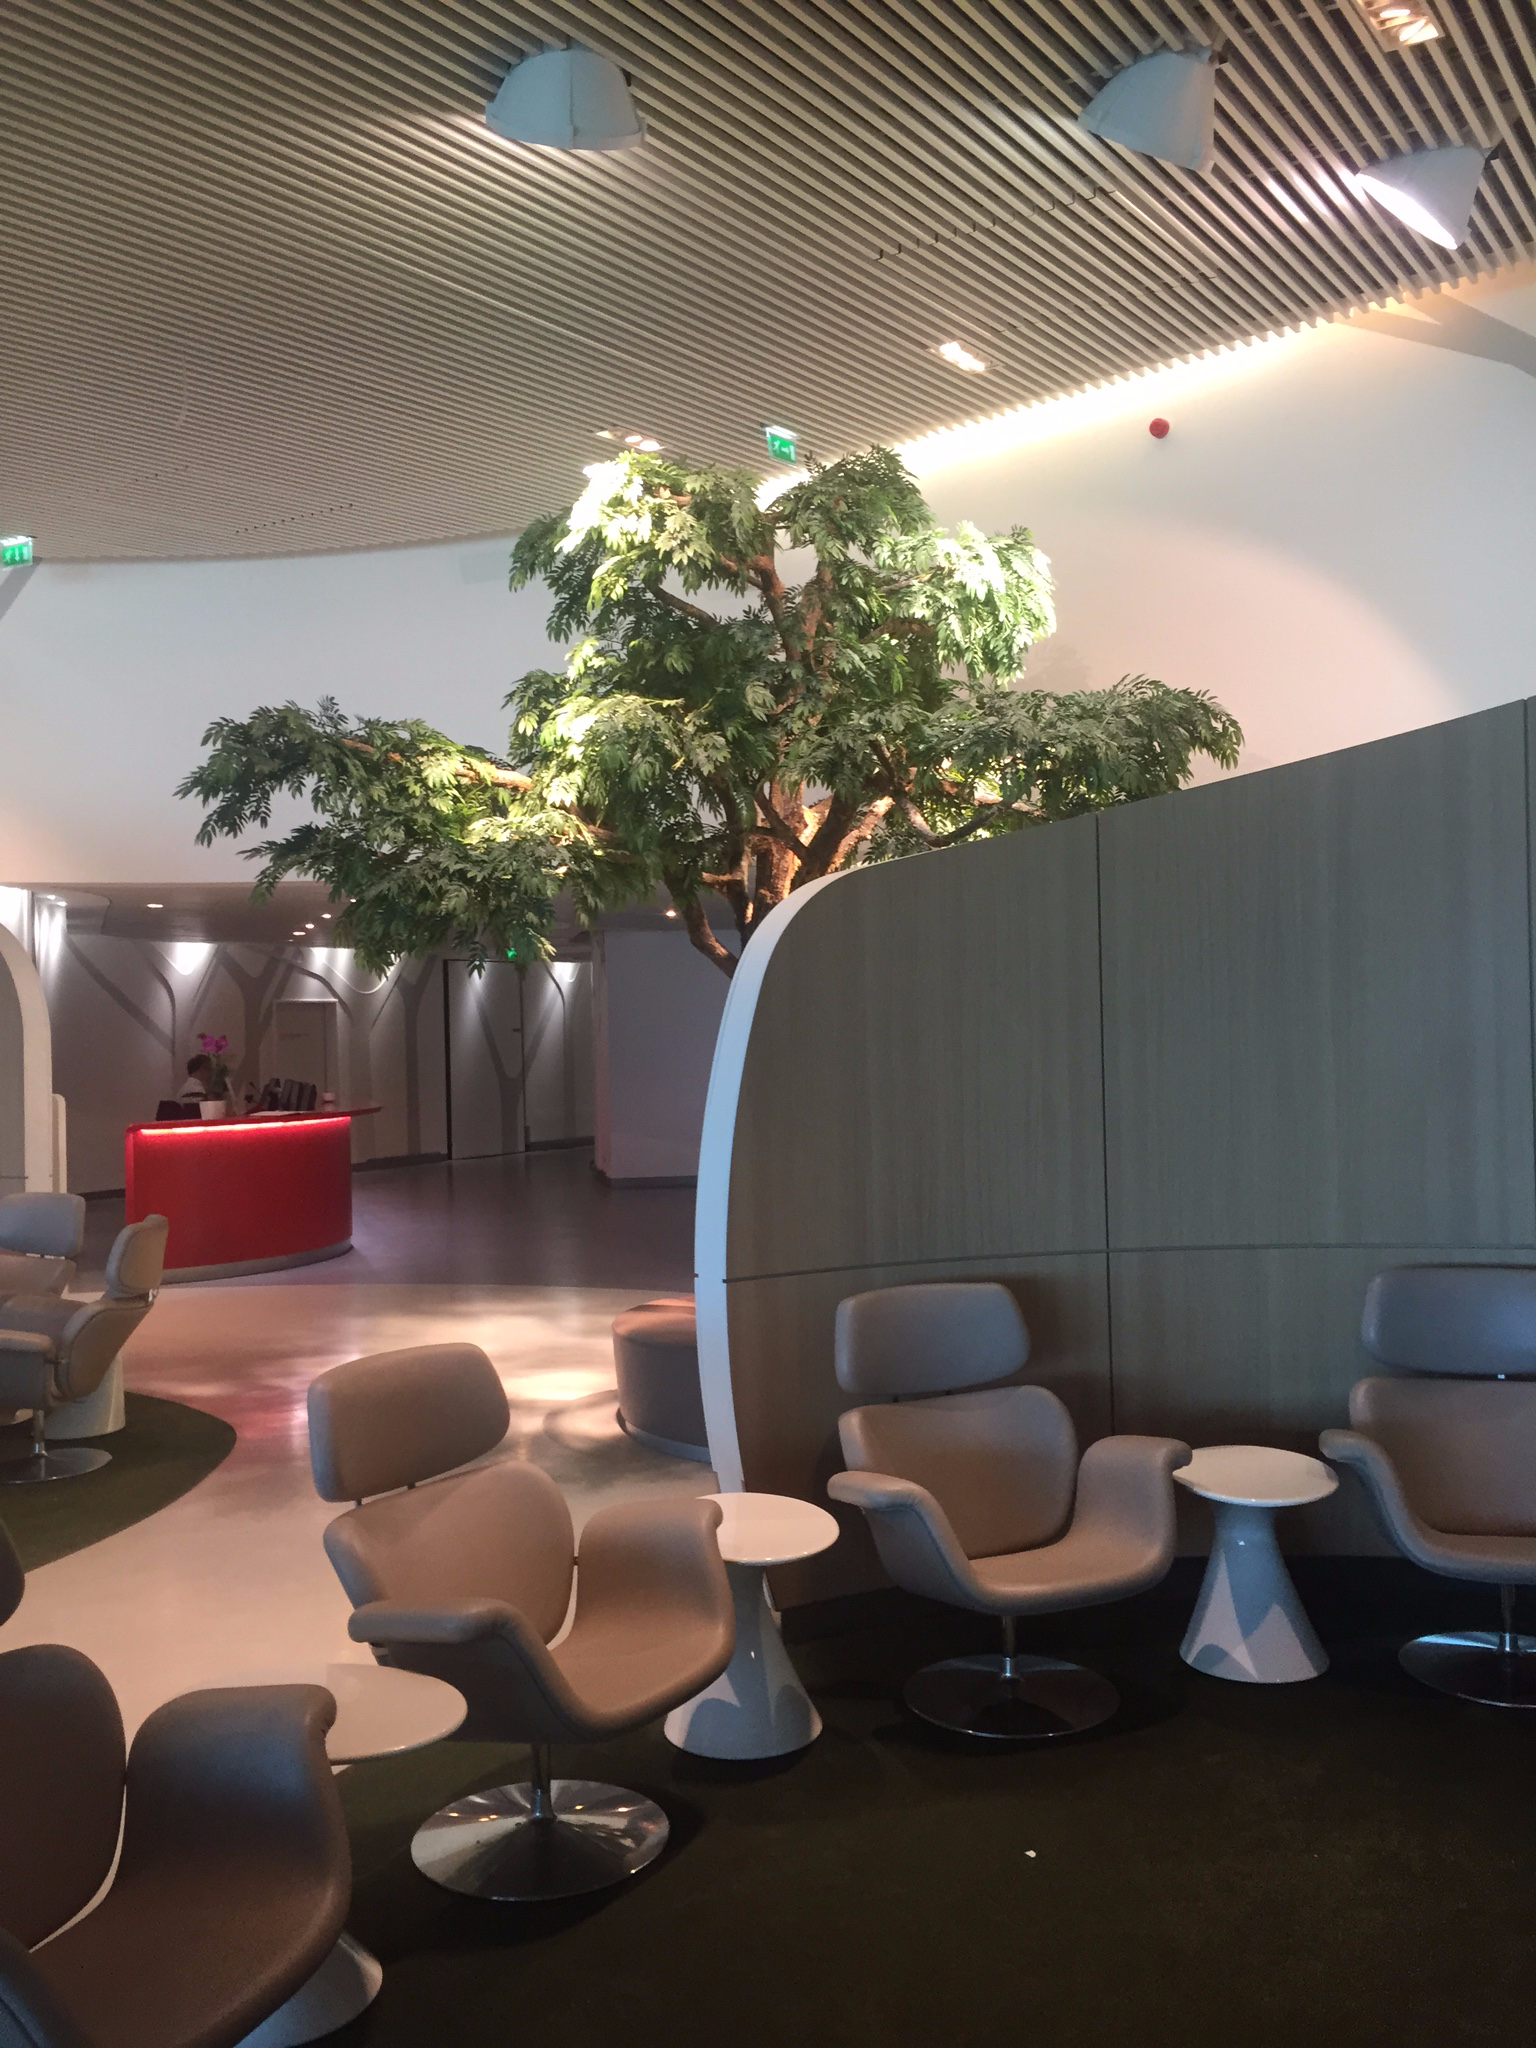 Air France business class lounge seating